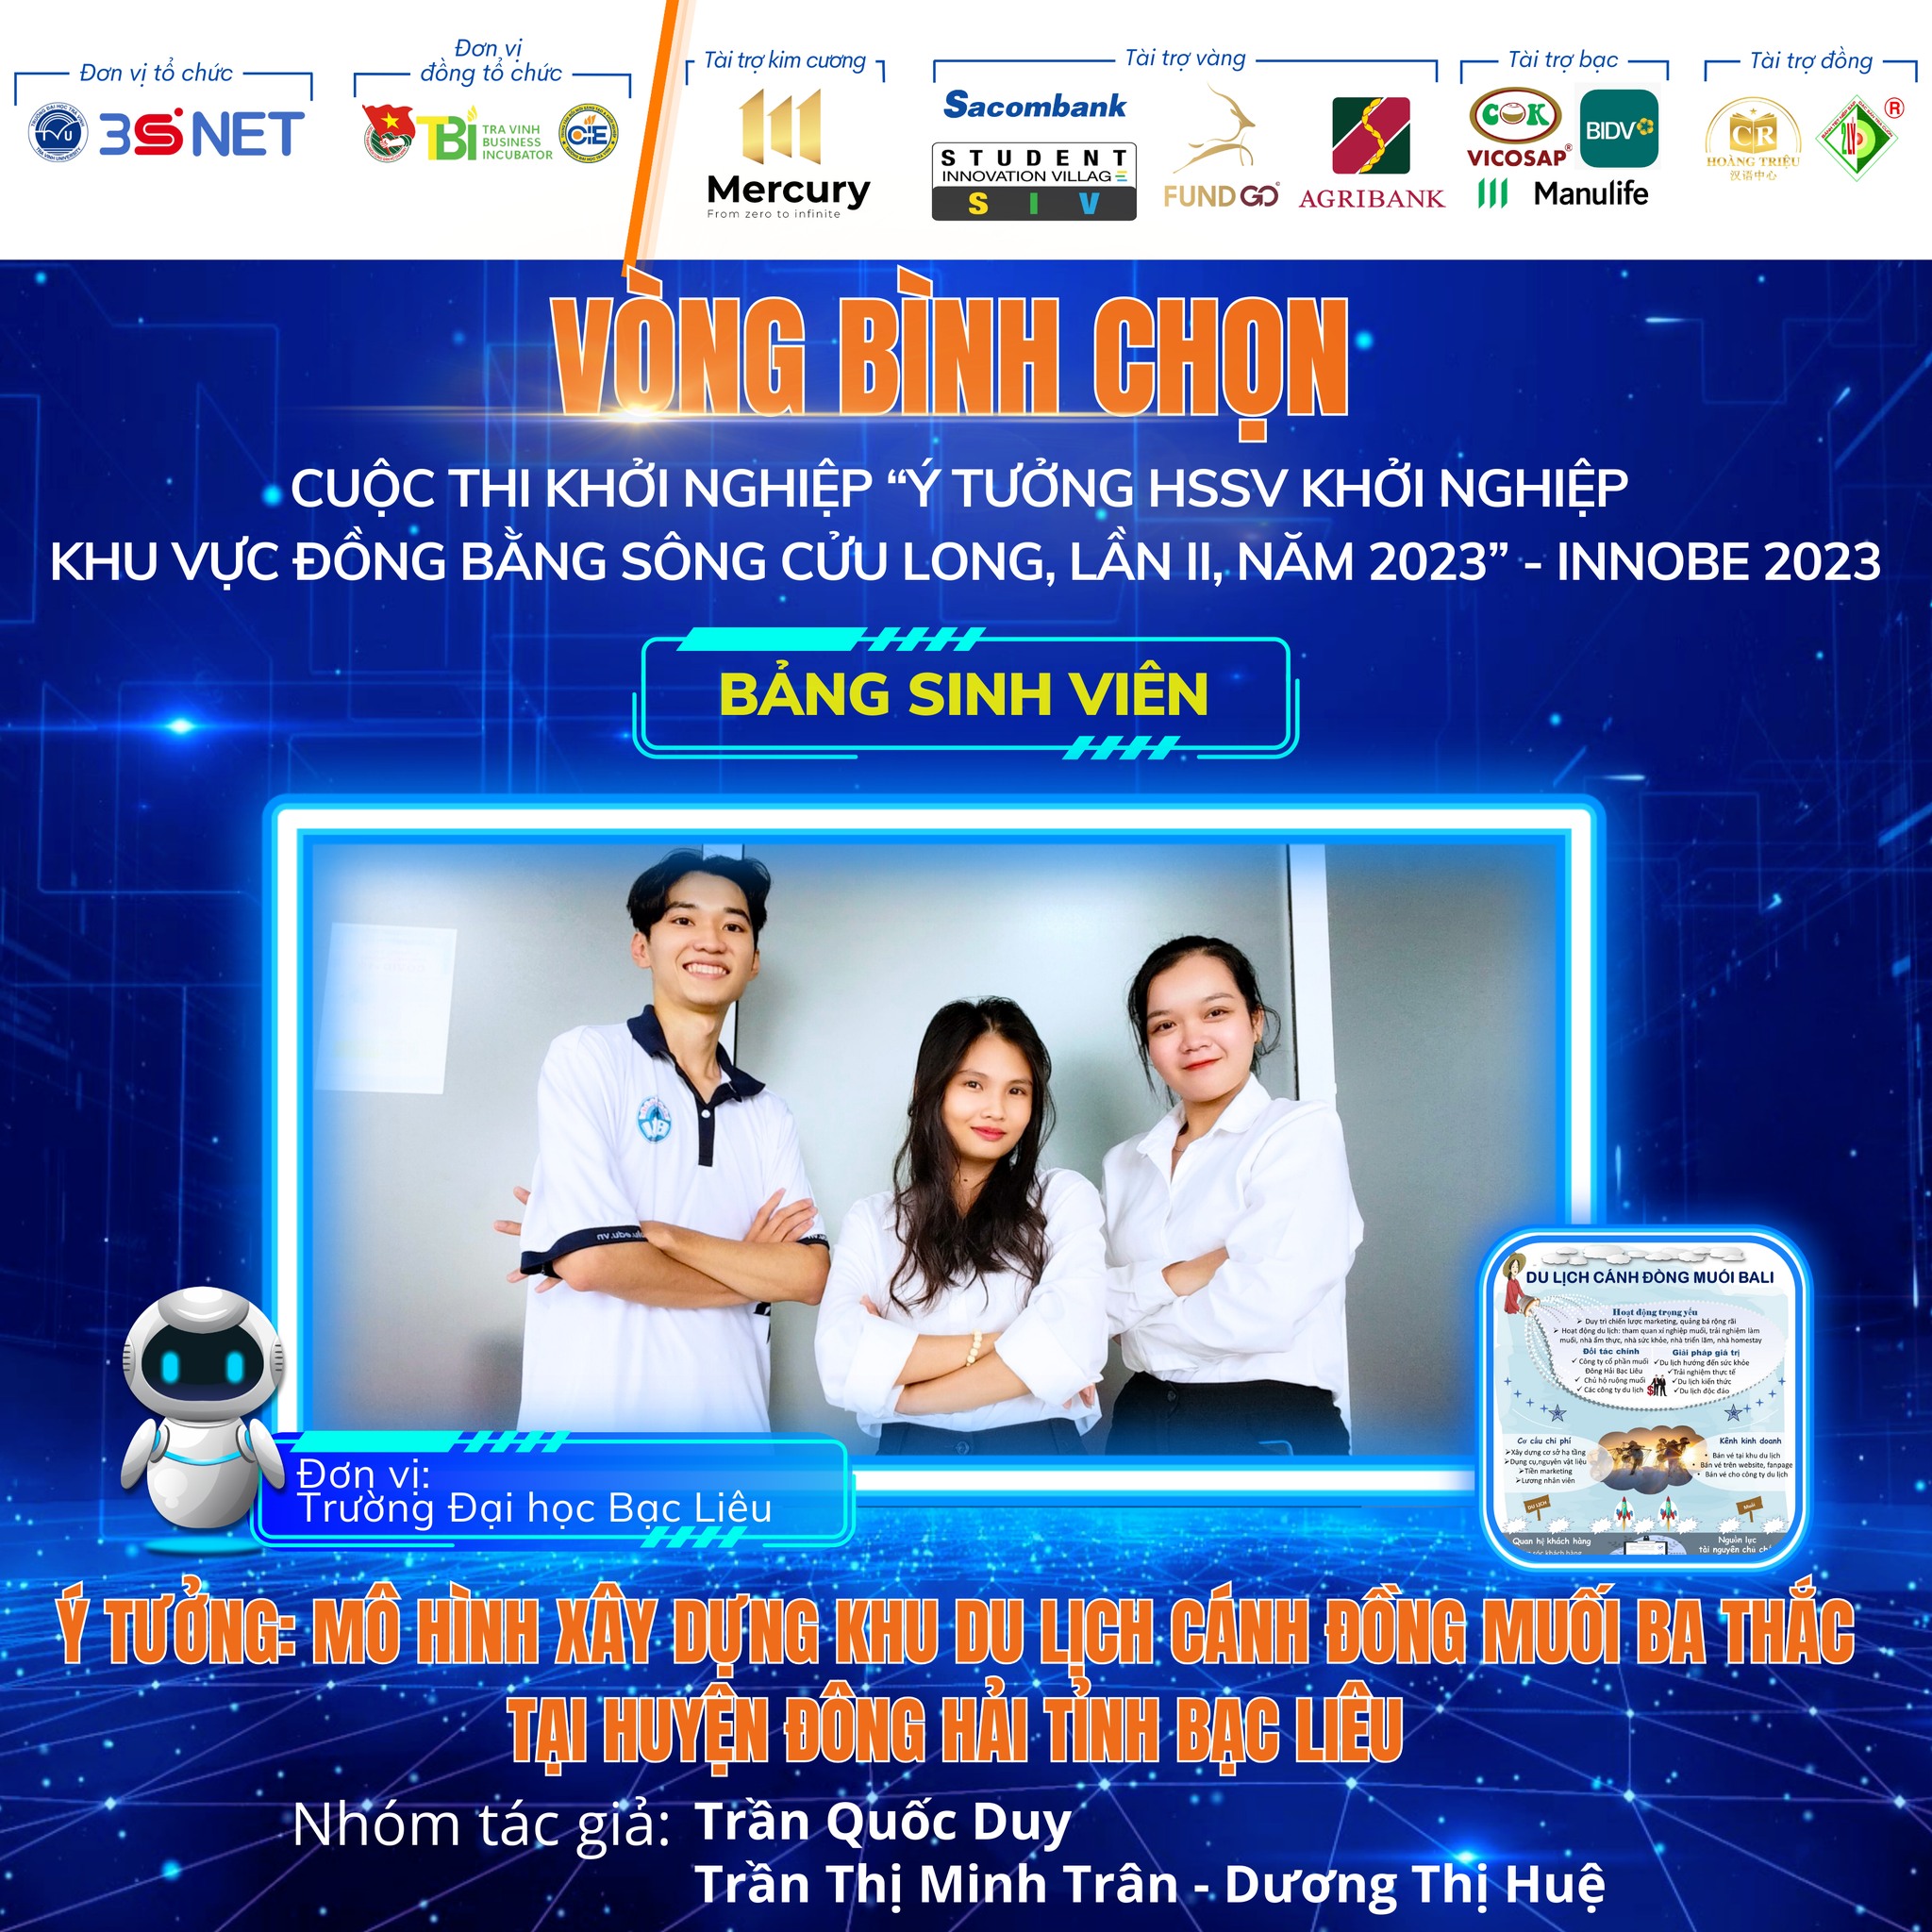 Bac Lieu University participated in the final round of the Student Startup Ideas Competition - INNOBE 2023 and launched the Center (HUB) for Student Innovation Village (SIV) in the Mekong Delta region